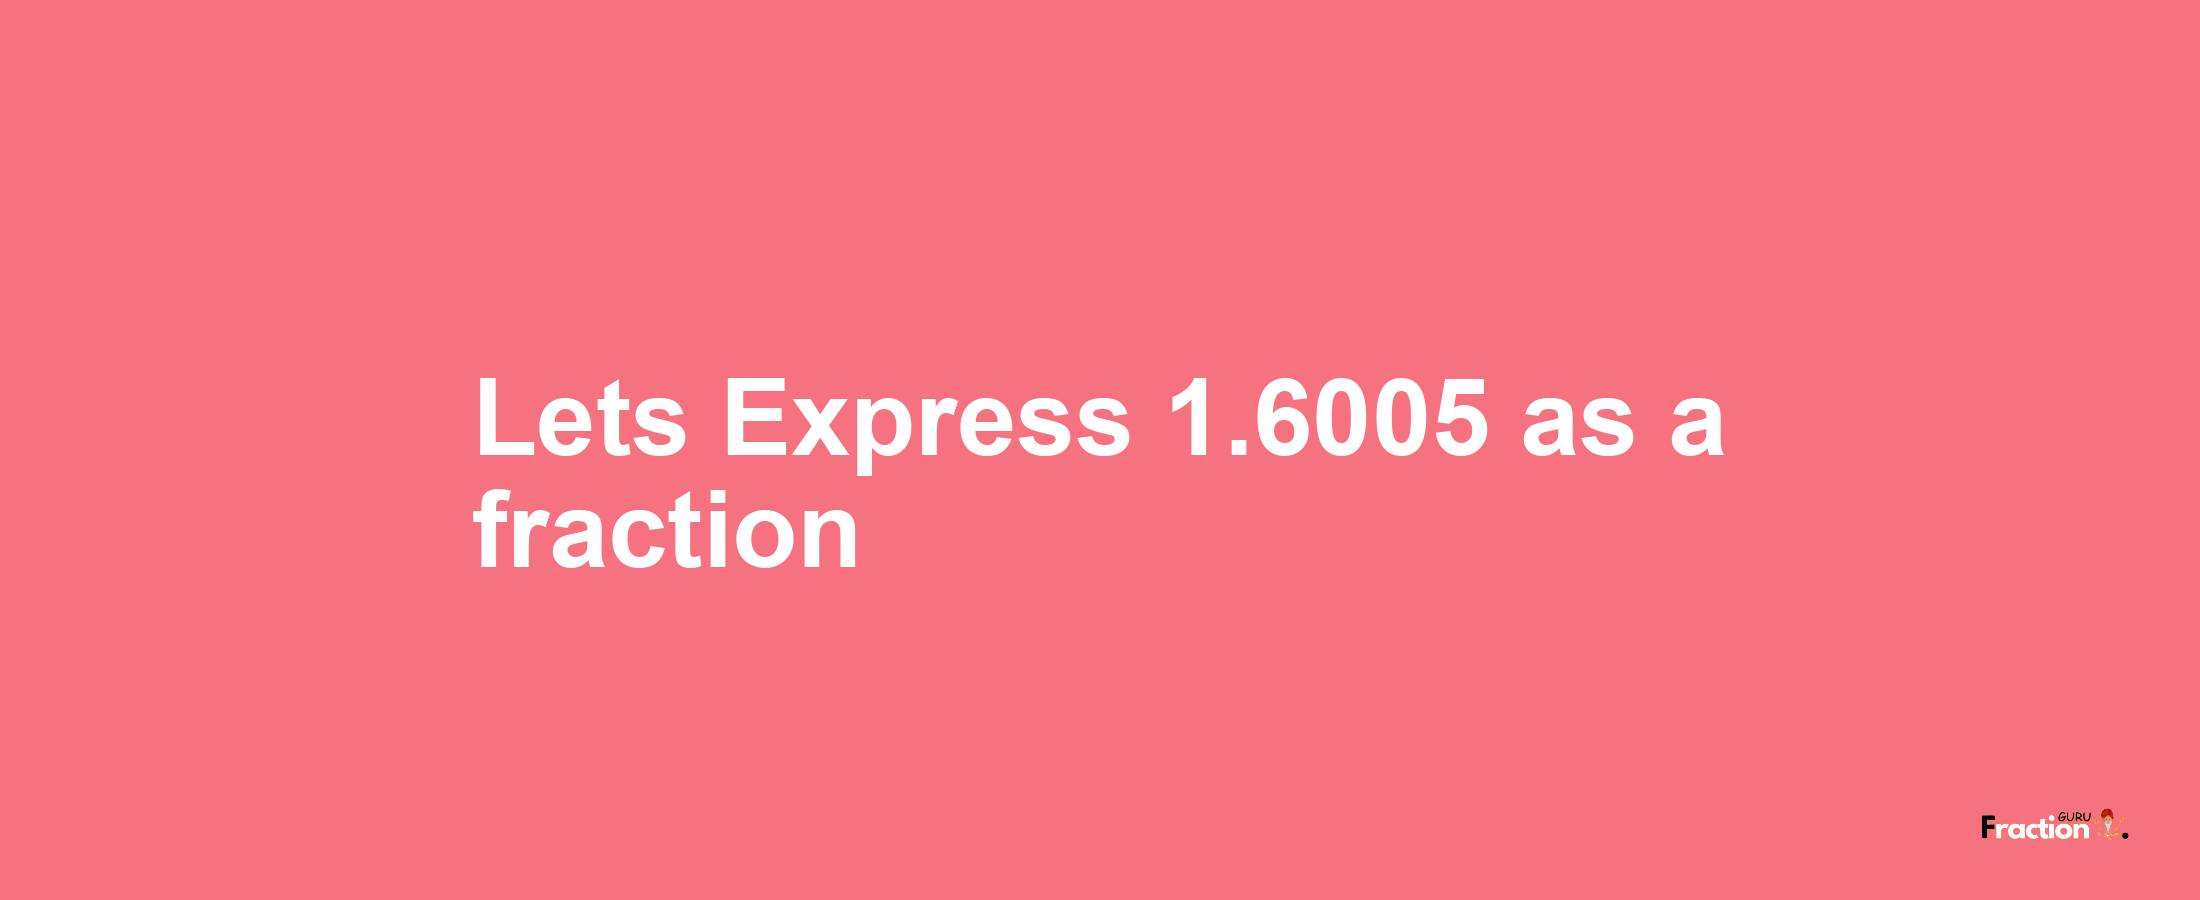 Lets Express 1.6005 as afraction